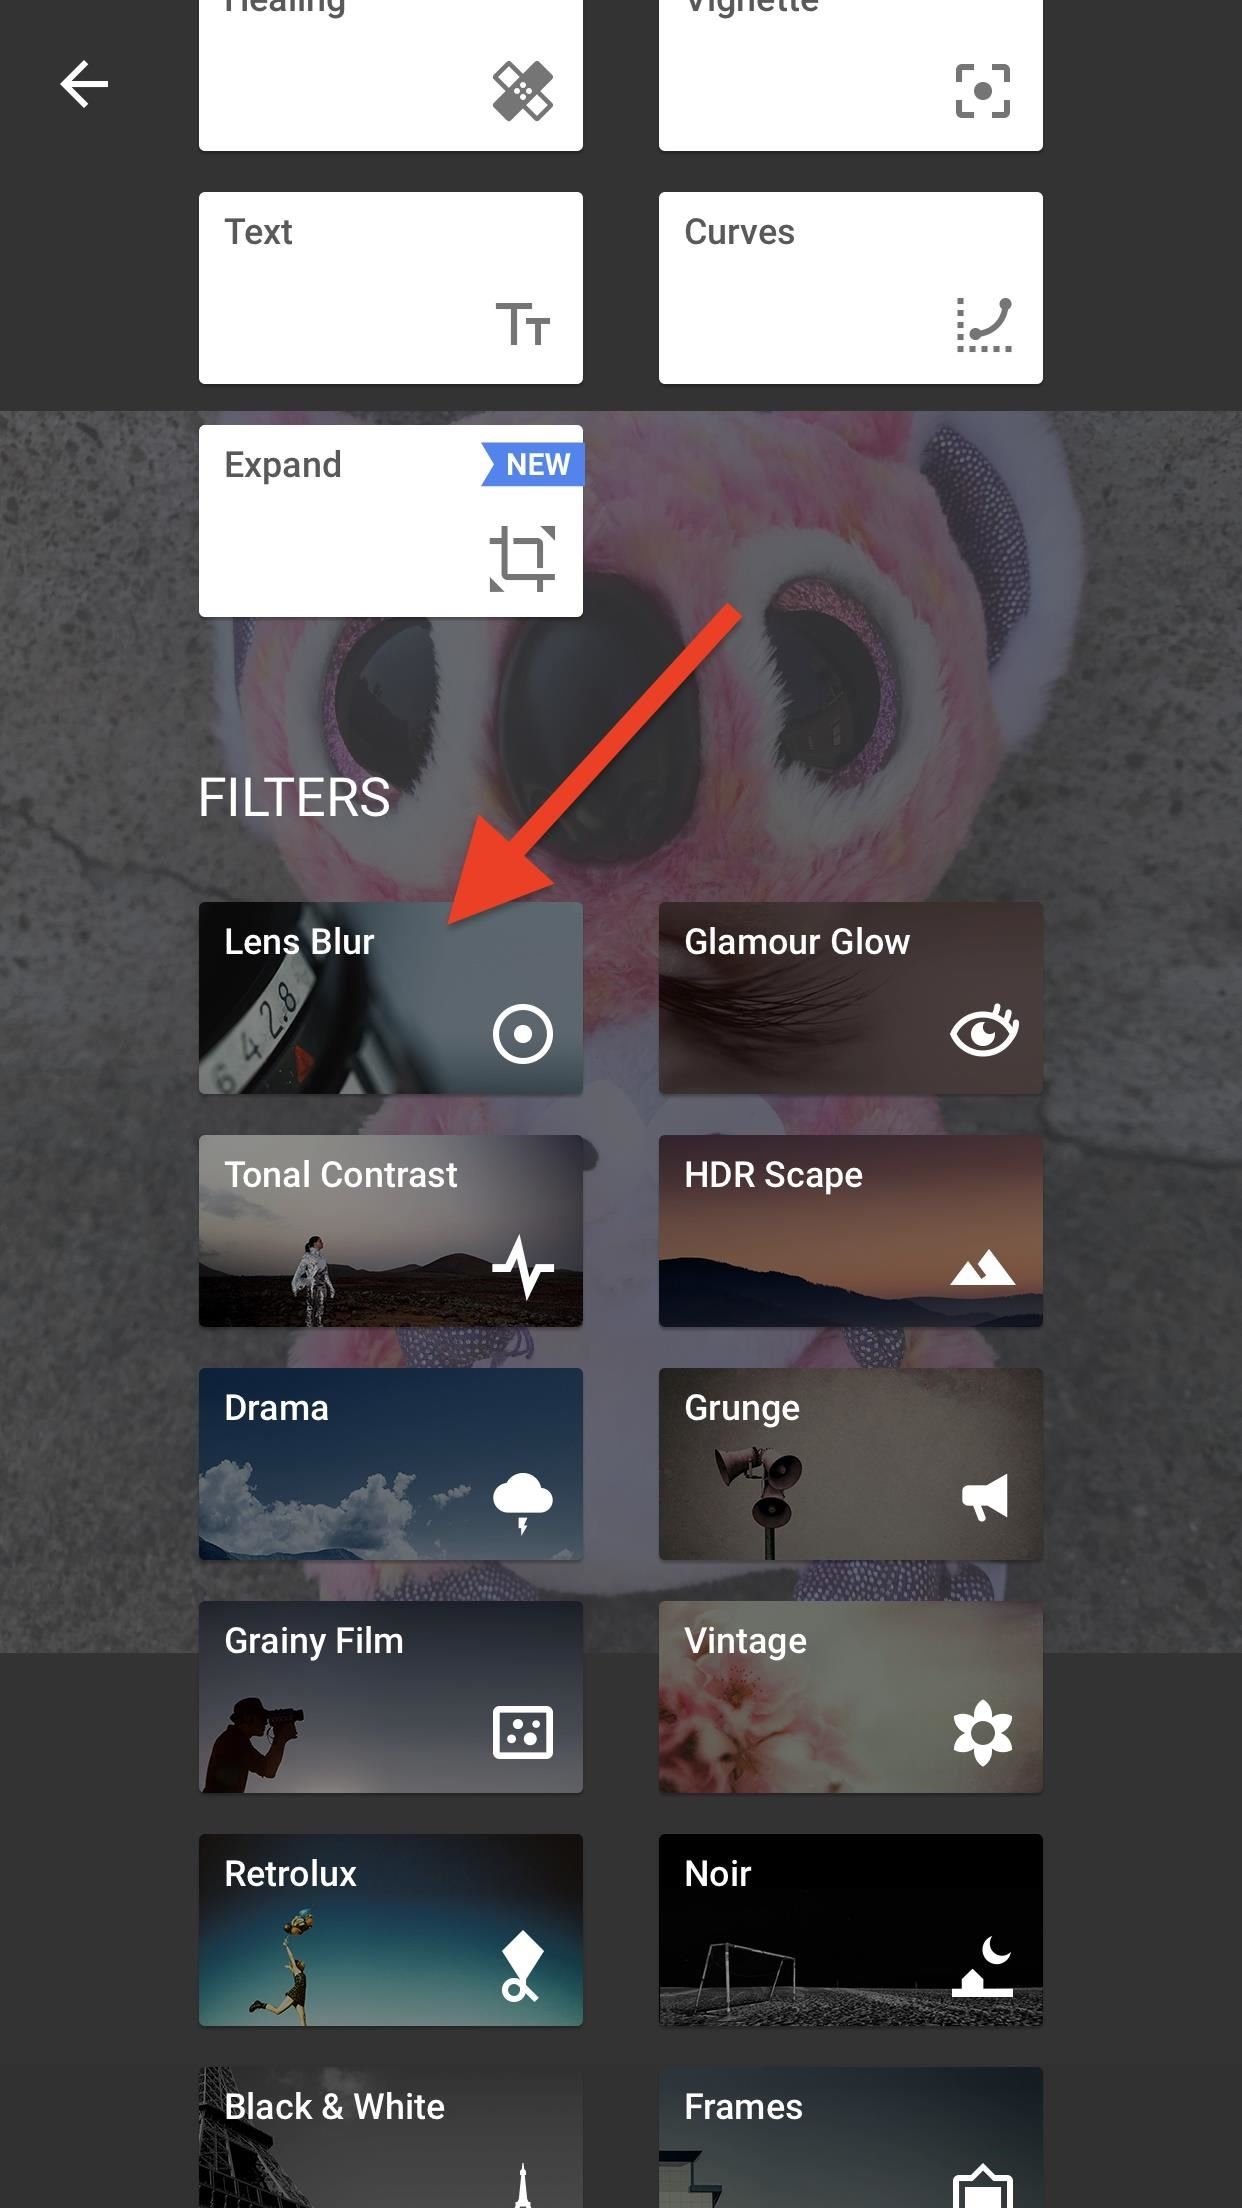 Snapseed 101: How to Blur NSFW Images to Share on Social Media